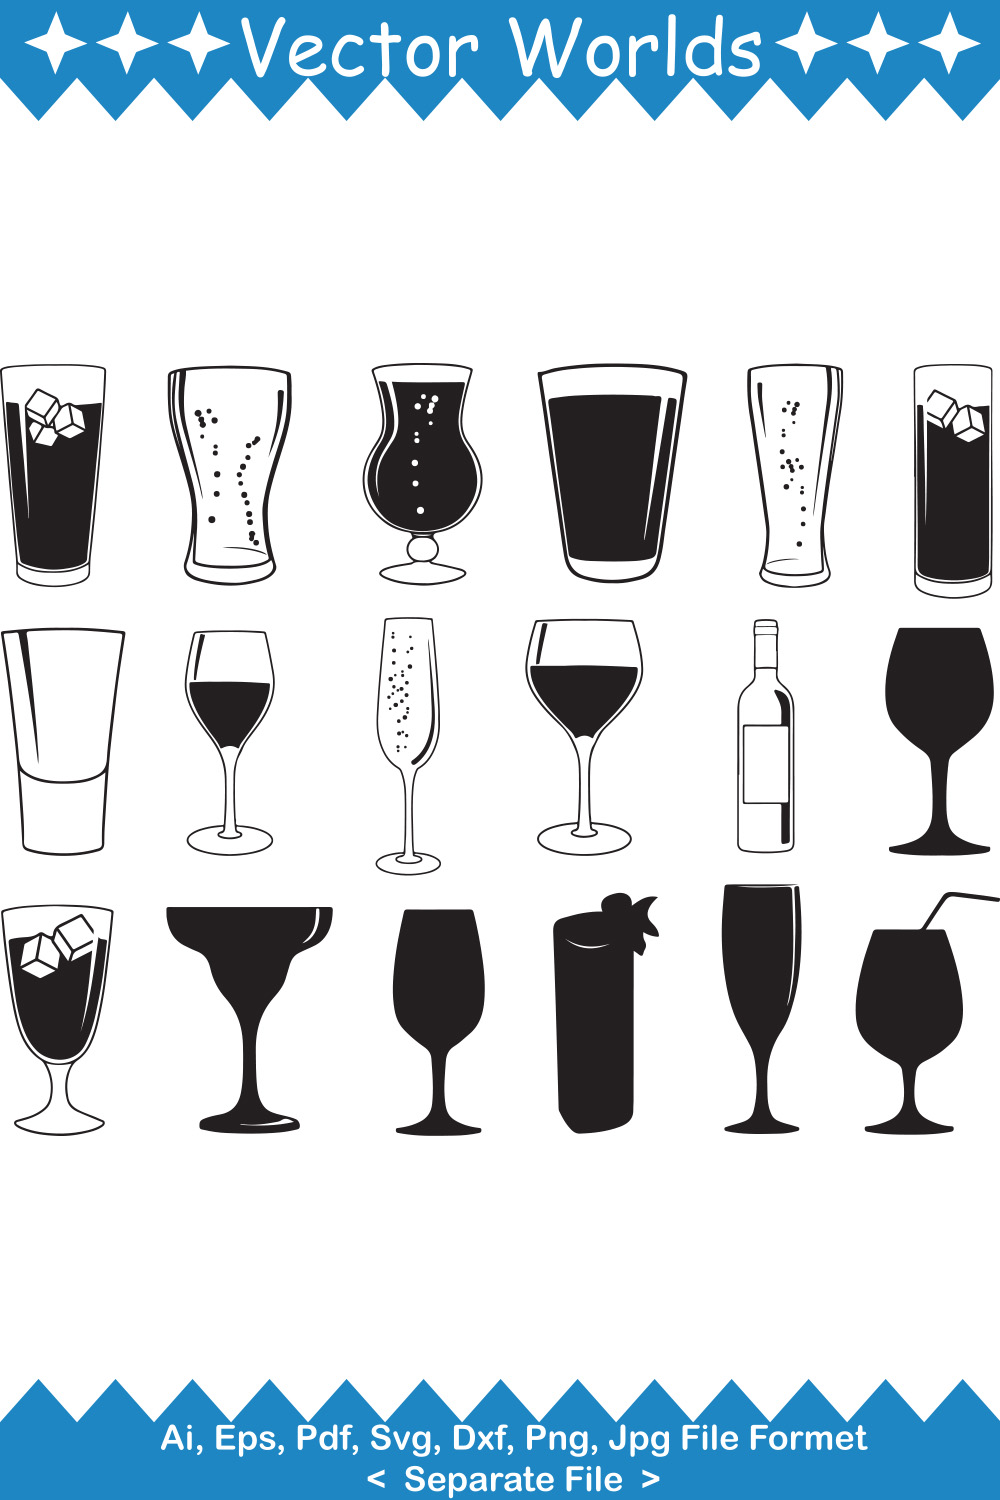 Pack of wonderful images of silhouettes of glasses for drinks